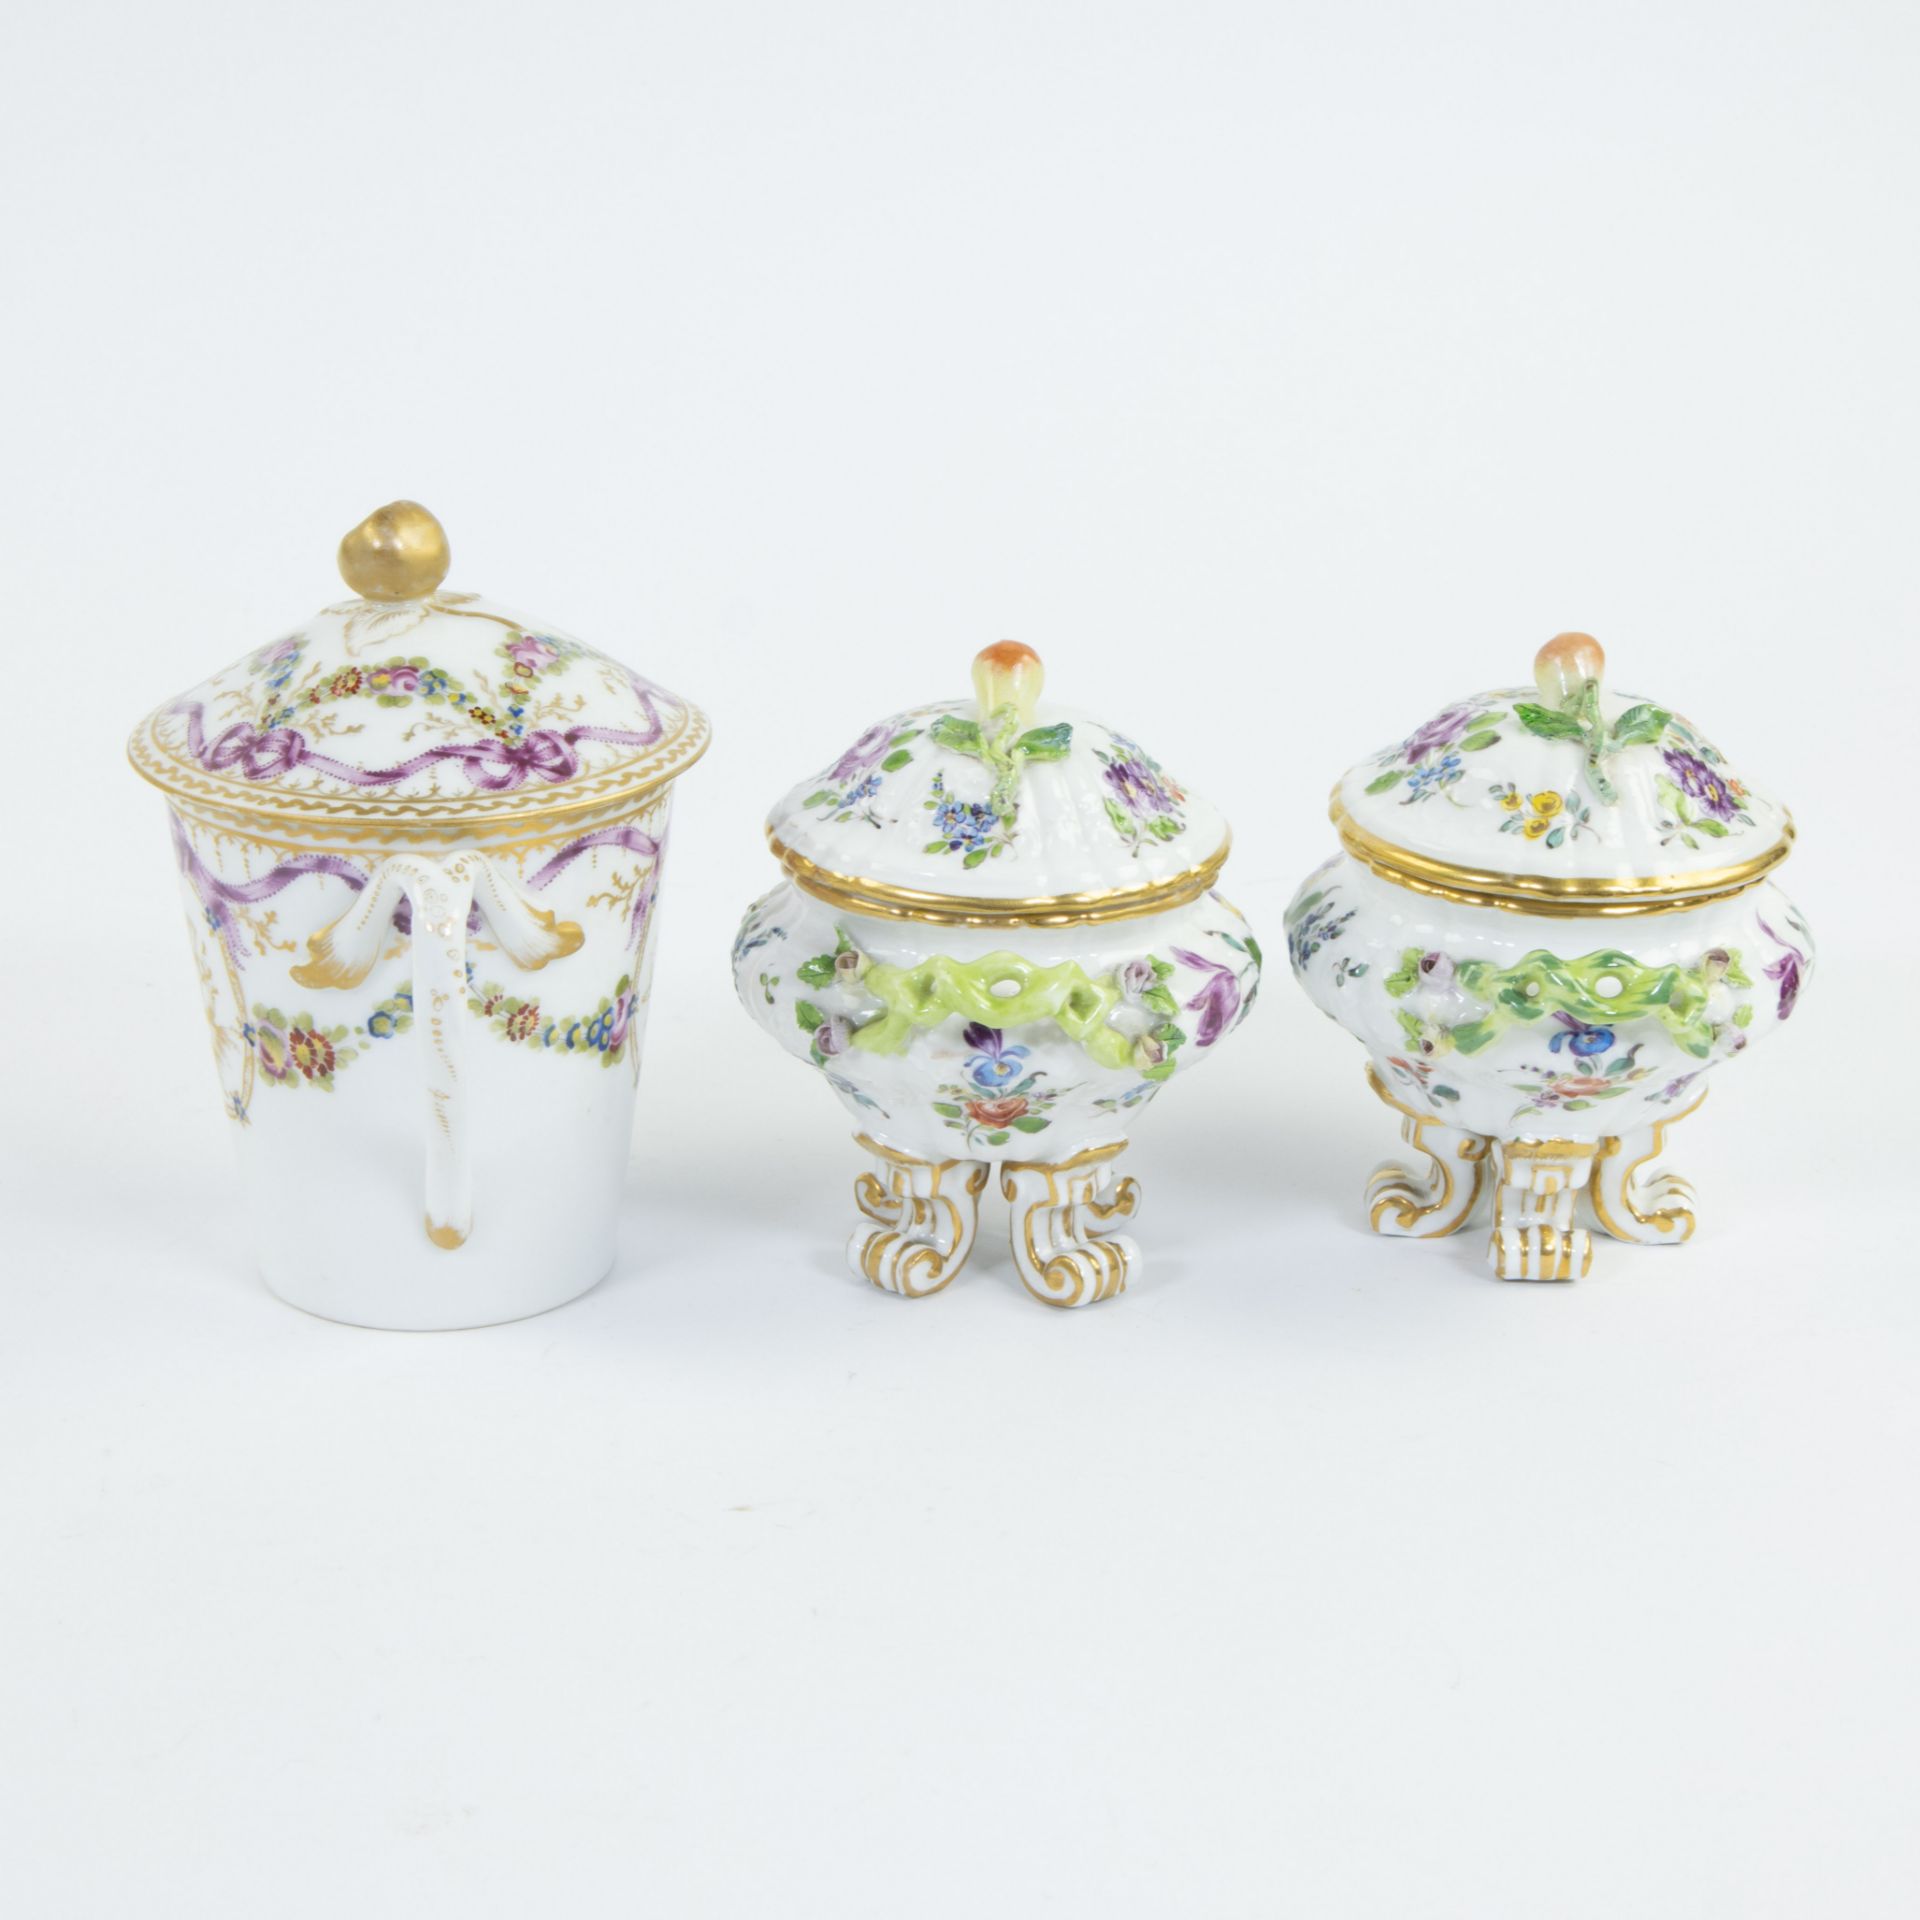 Lot of porcelain: 2 lidded jars Samson and 18th century Parisian chocolate cup 'trembleux' brand Mar - Image 4 of 6